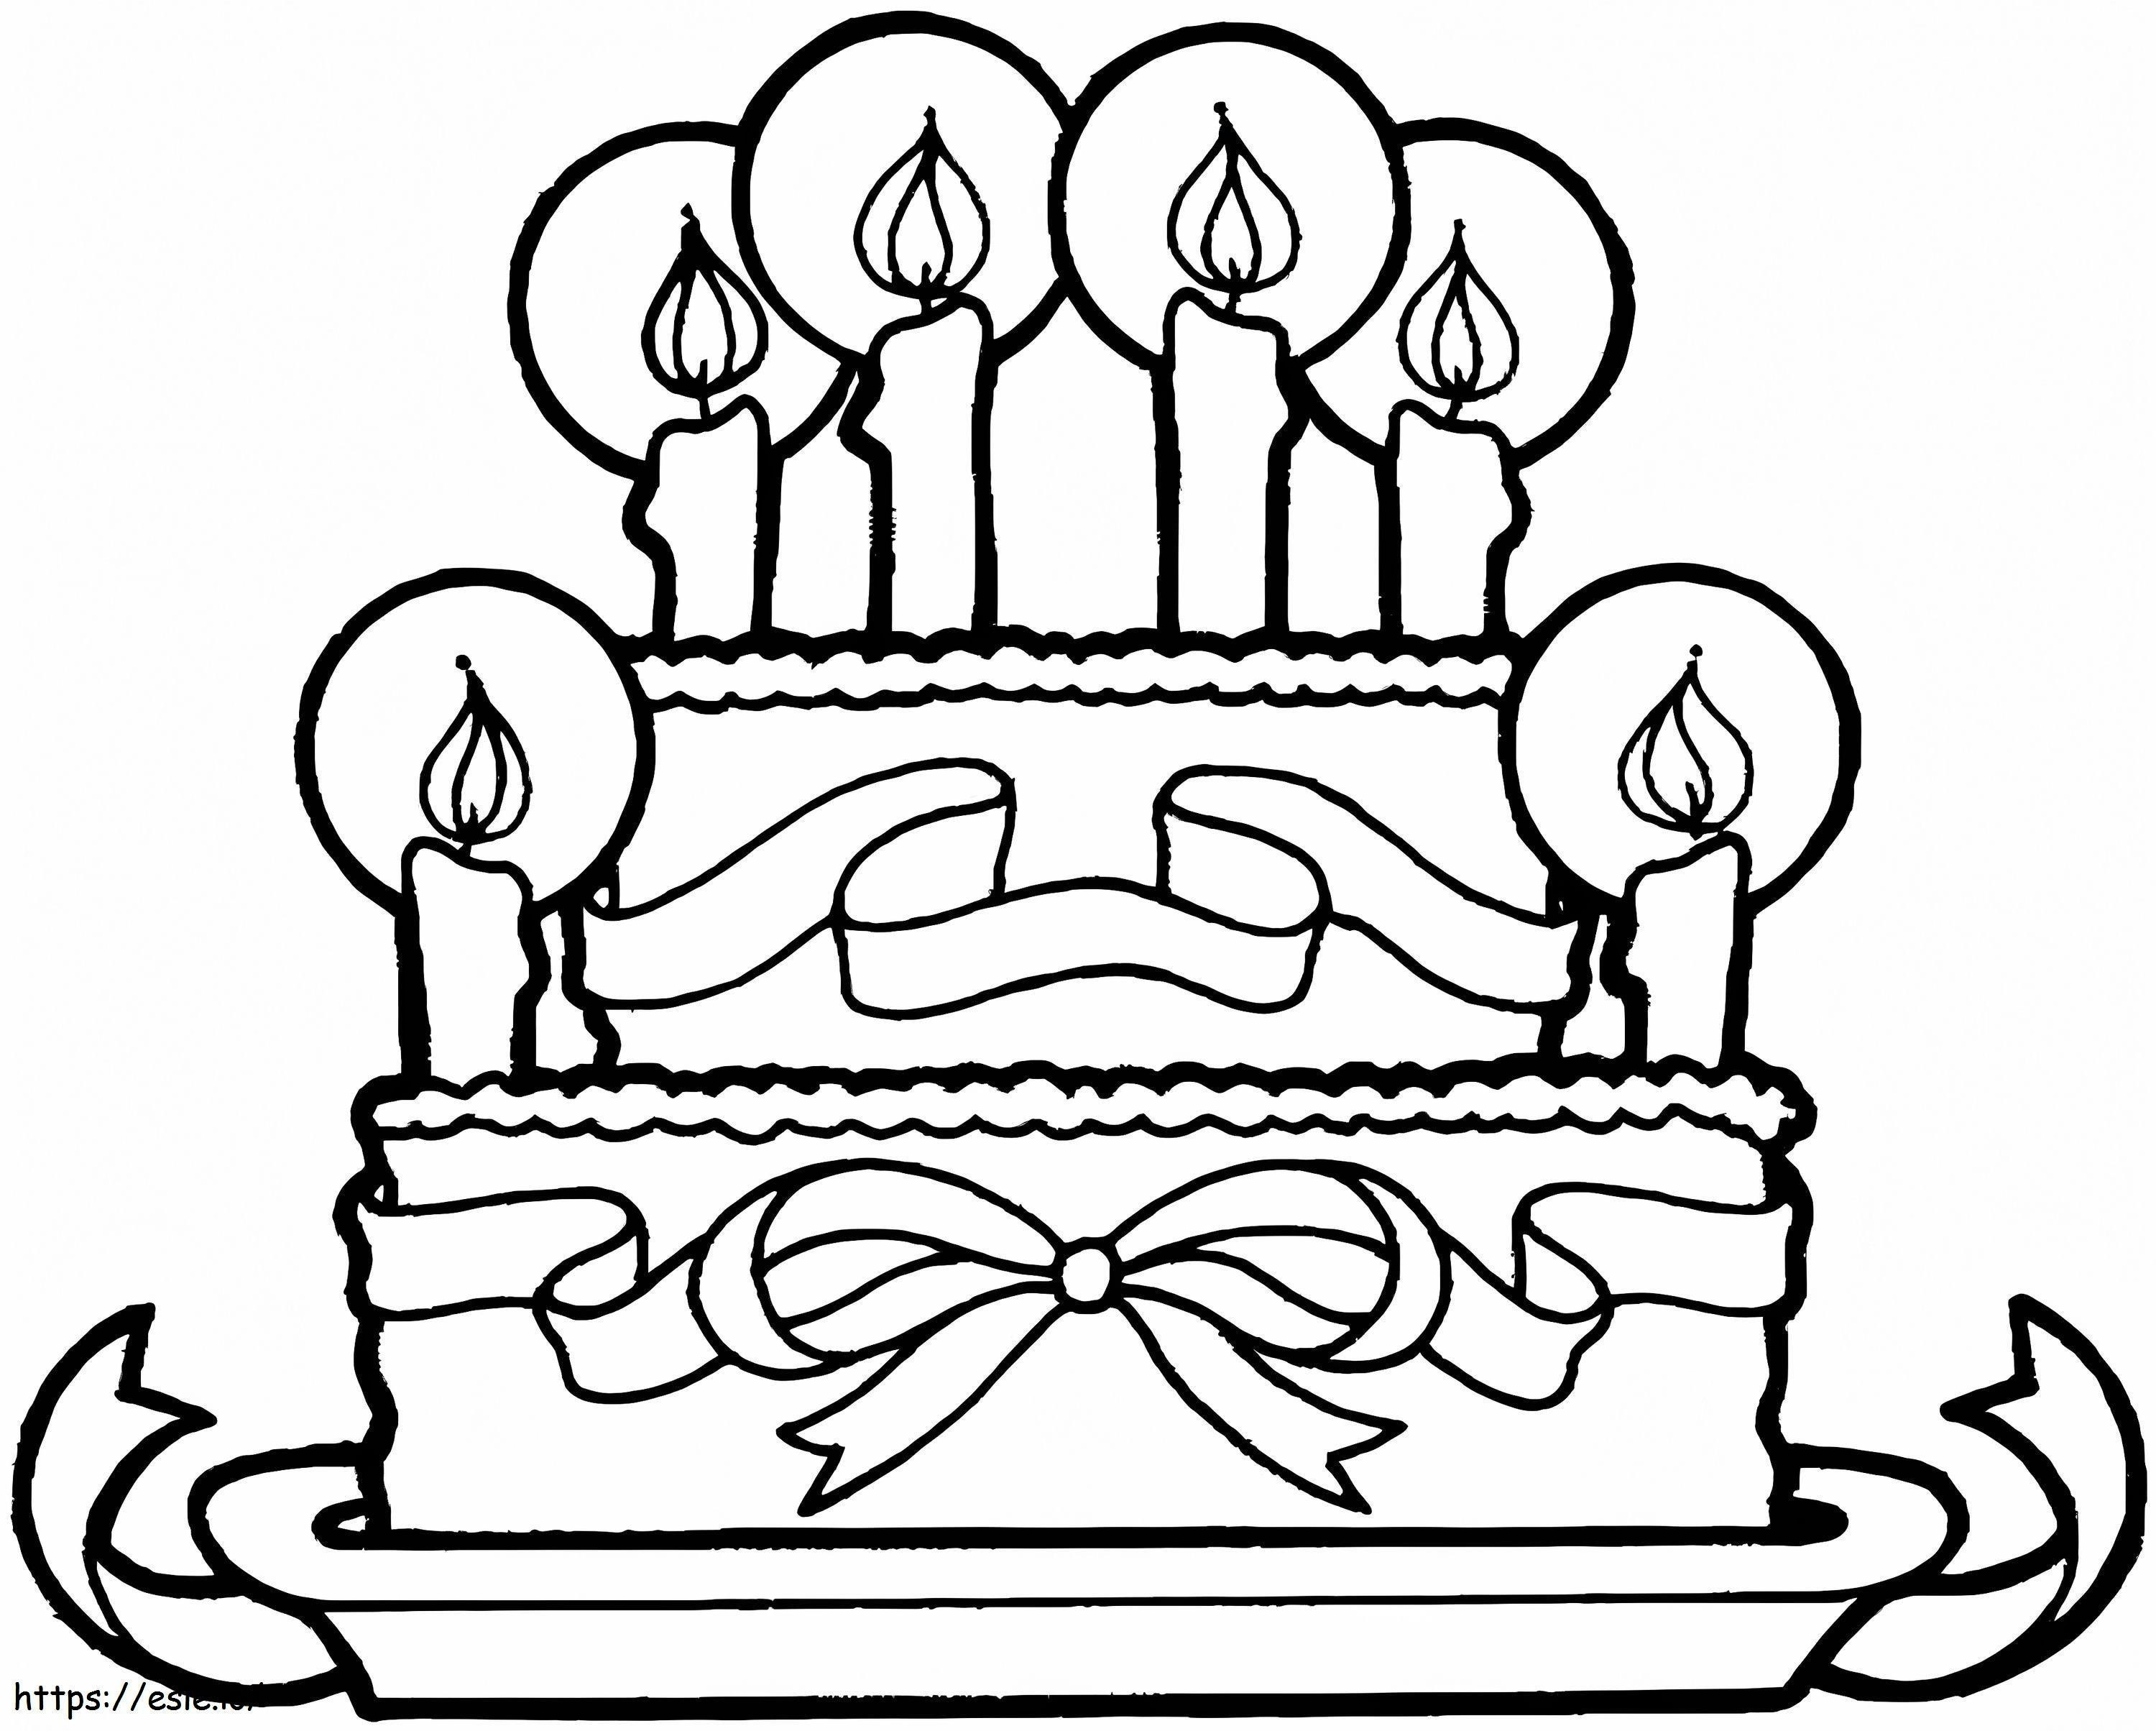 Simple Birthday Cake coloring page